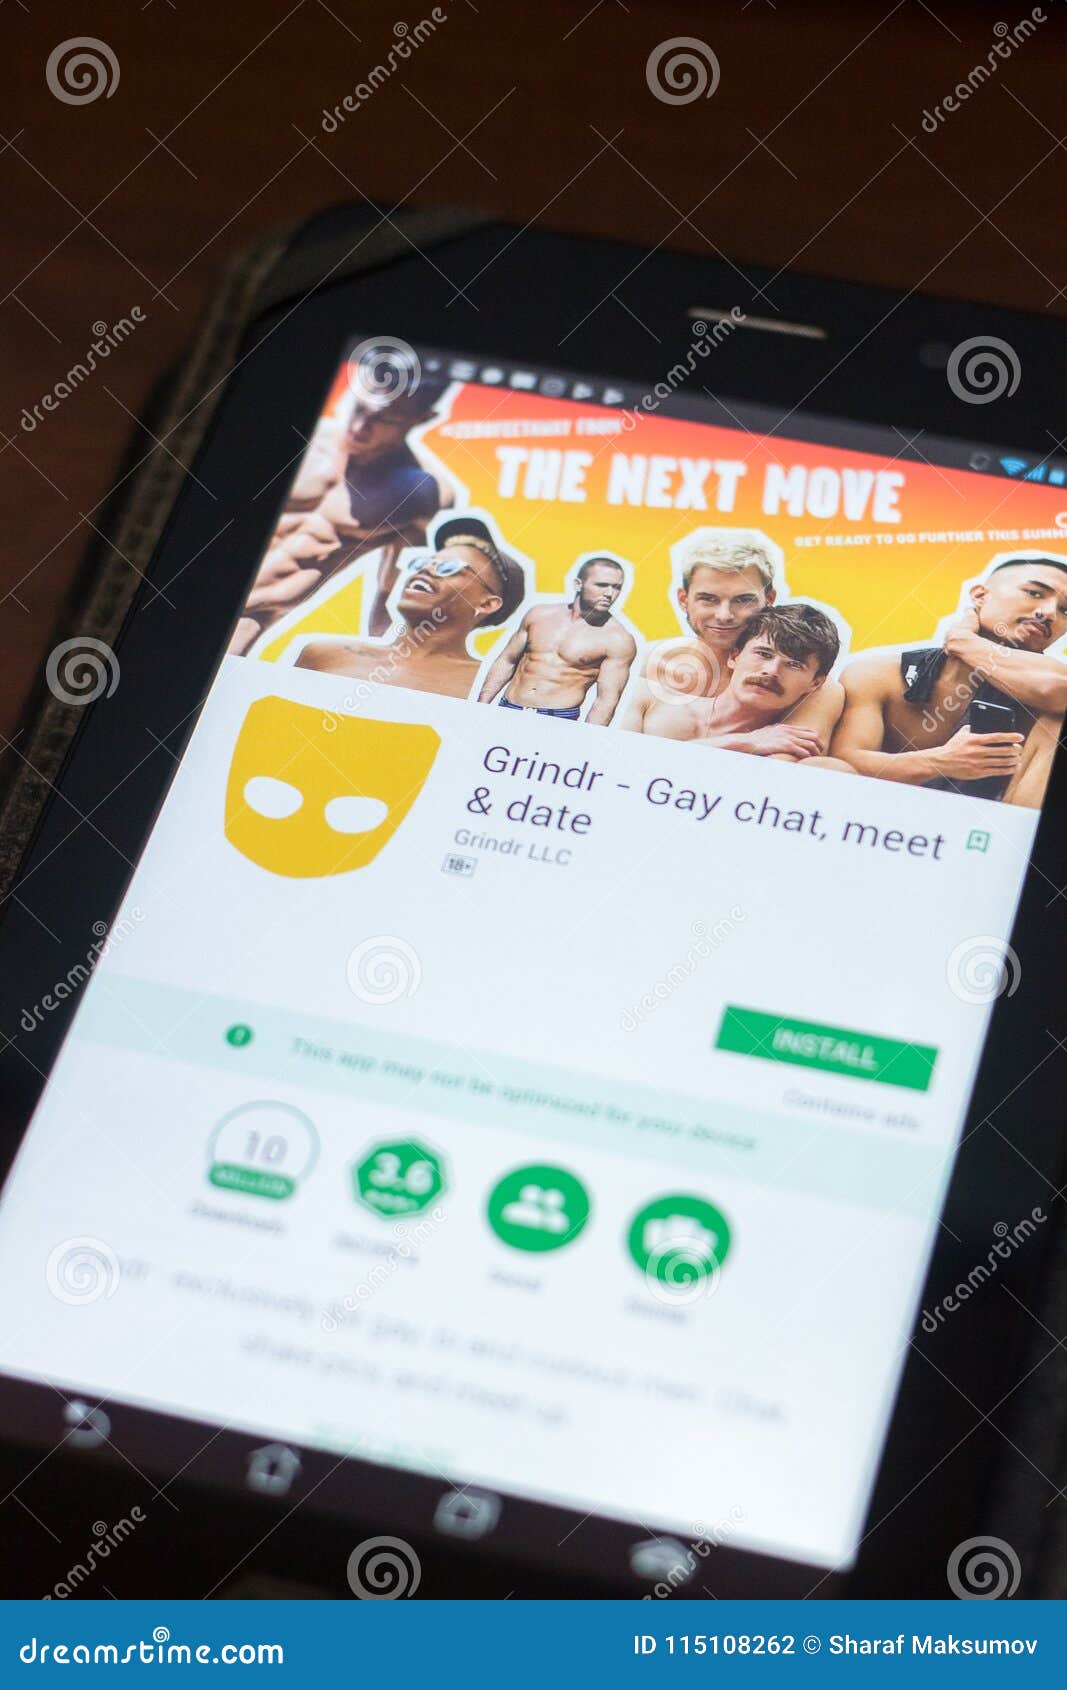 gay chat mobile